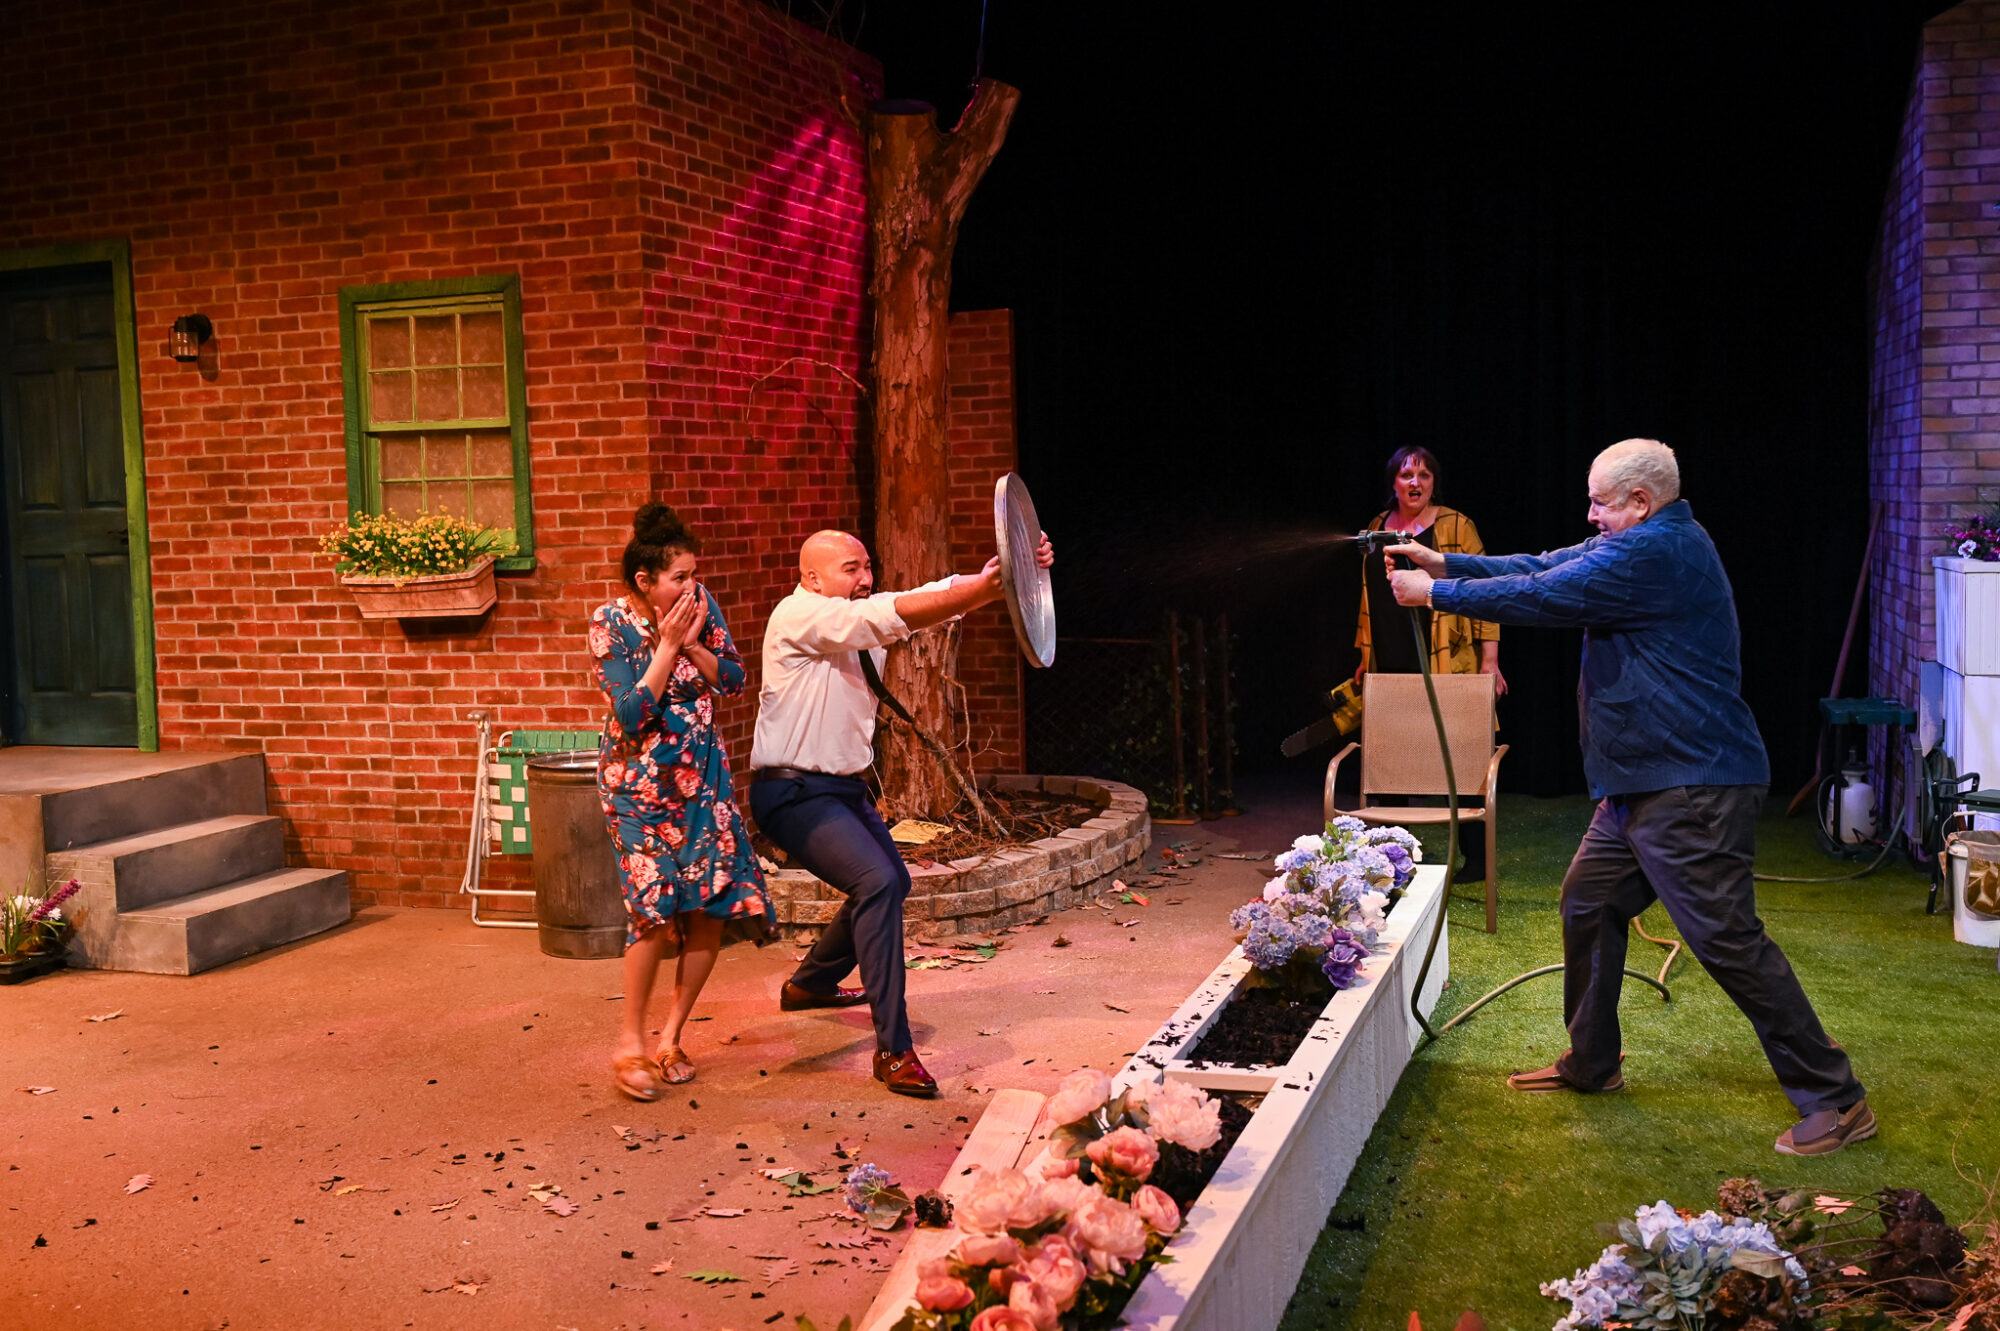 BWW Review: Thorny Comedy NATIVE GARDENS Takes Aim at Issues